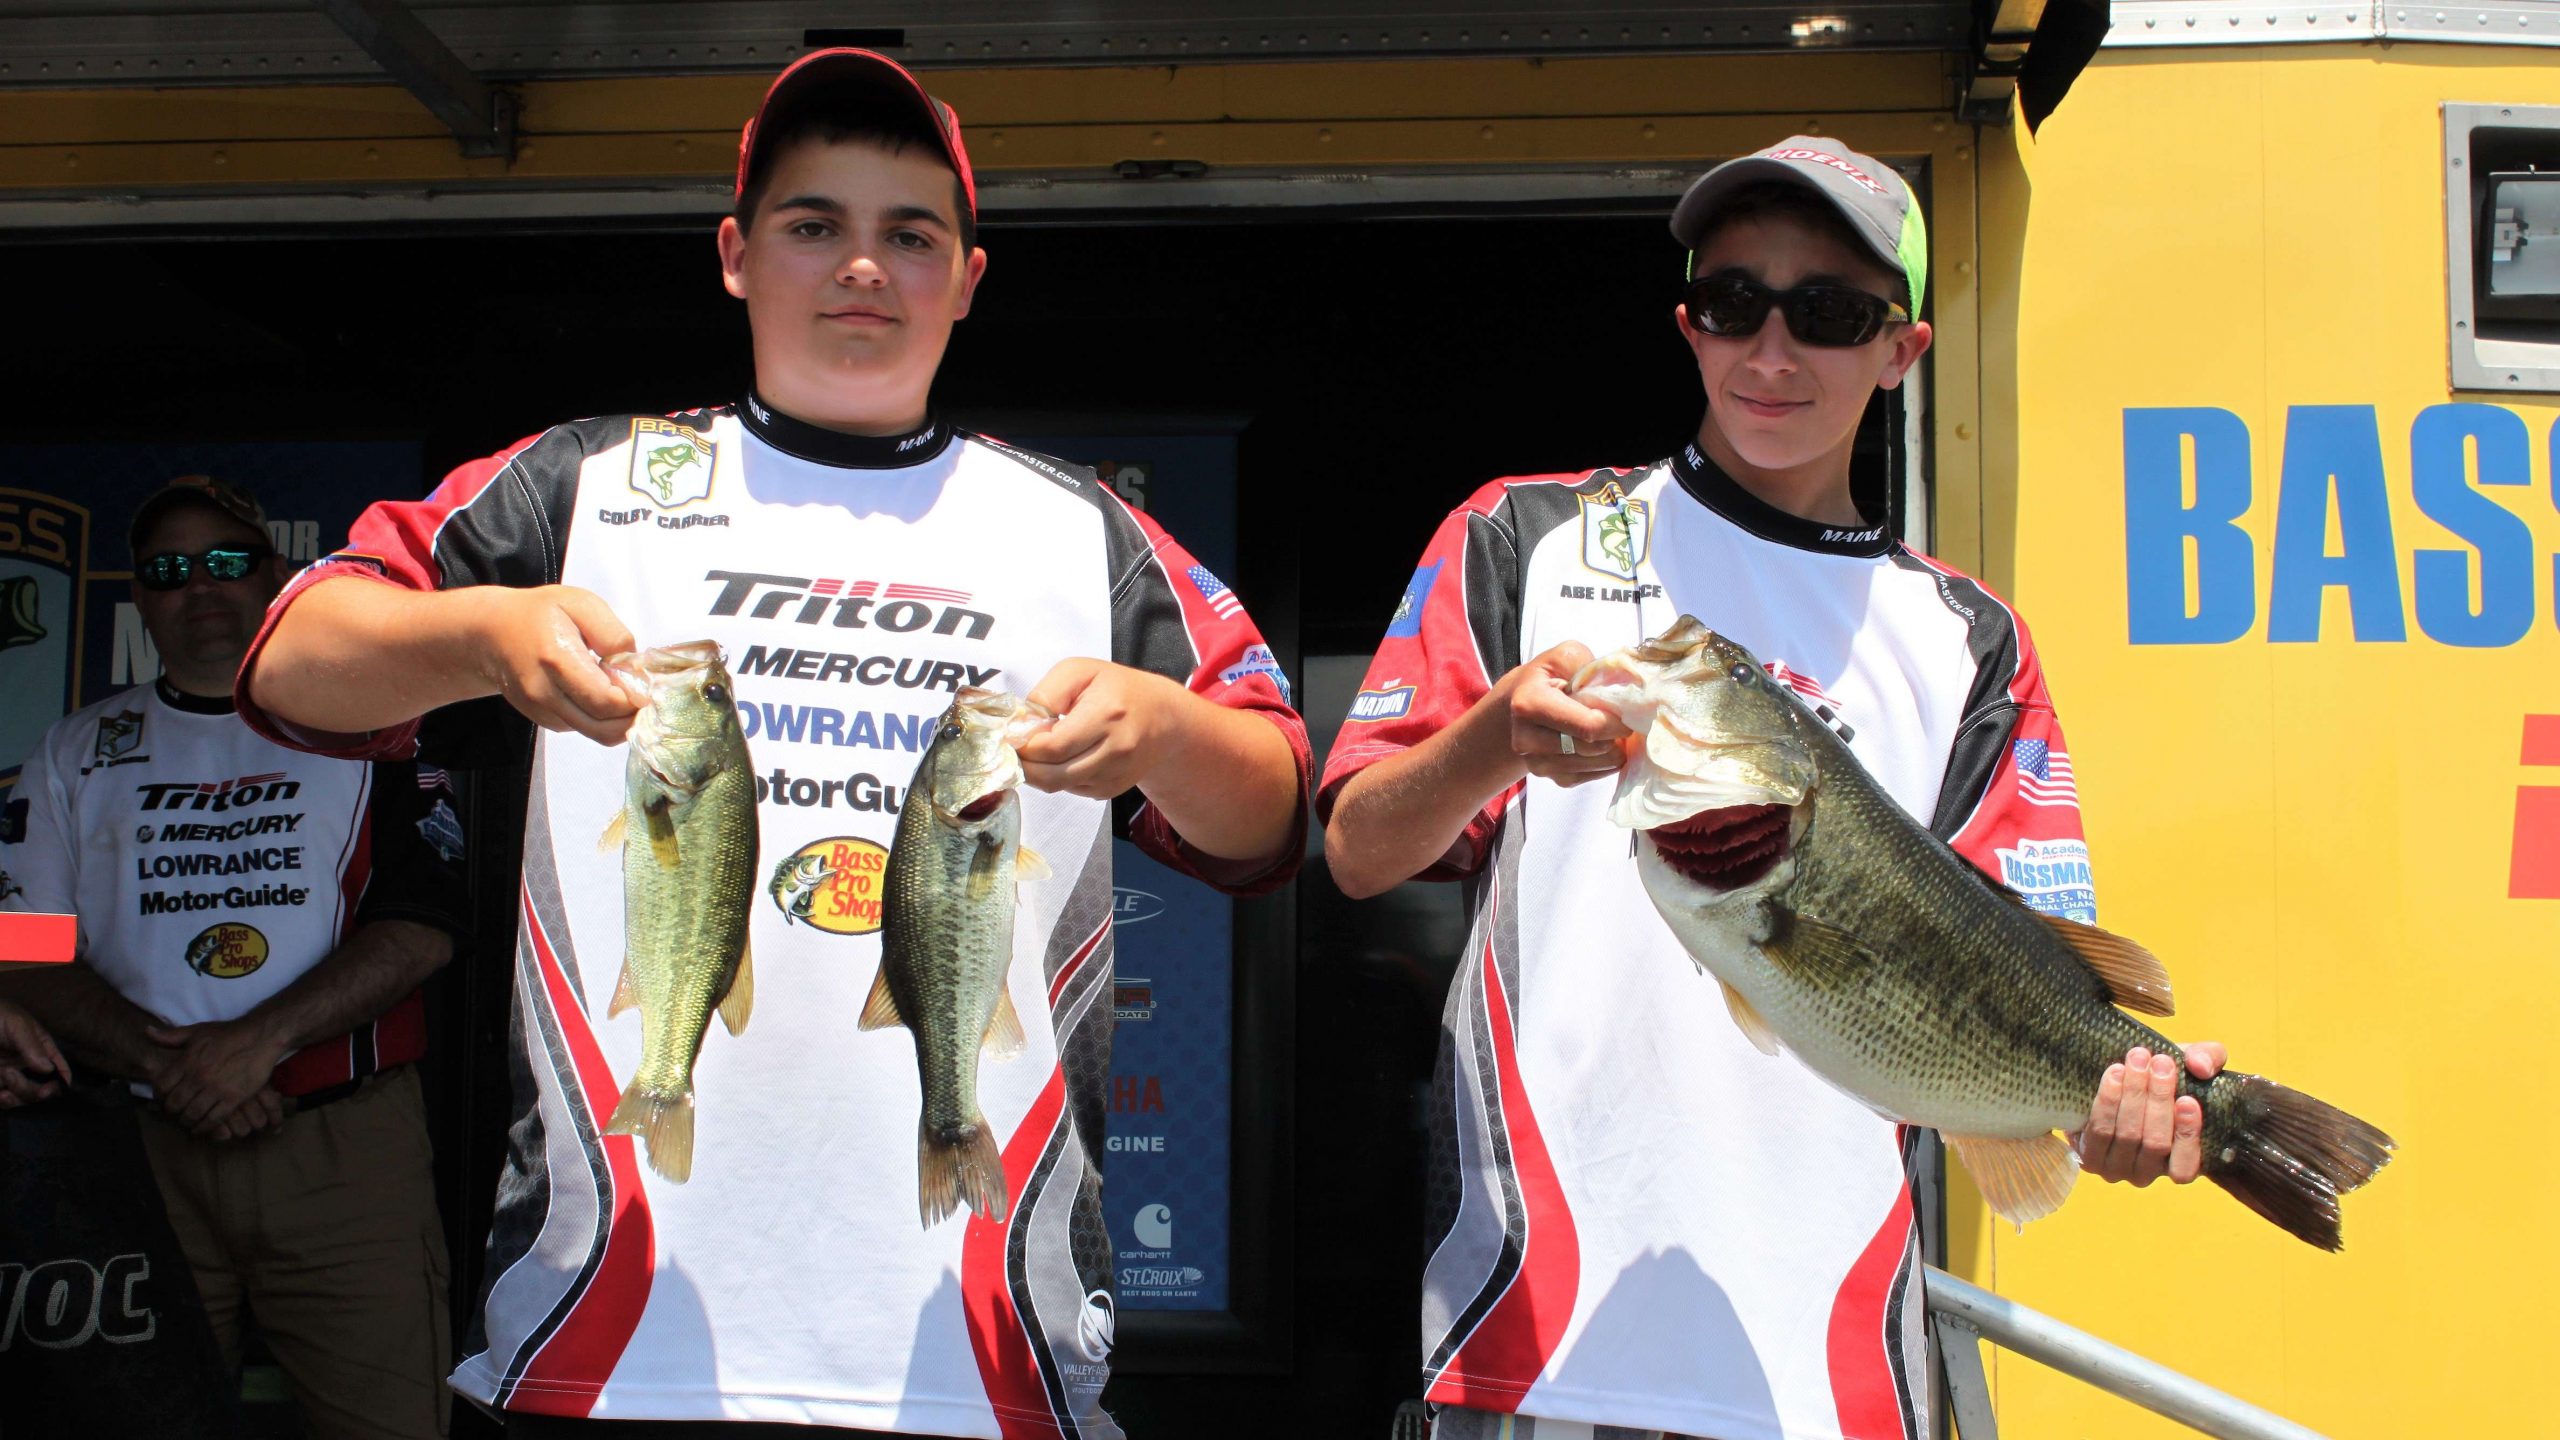 Colby Carrier and Abe Lafrance of Maine are in fourth place with 9-15.
